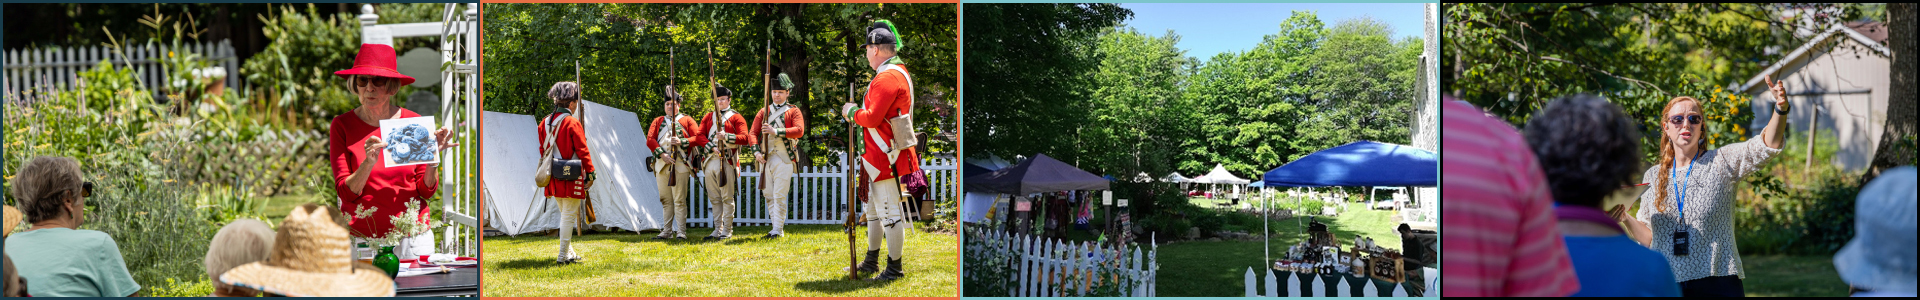 Saratoga County Historical Society at Brookside Museum - Event